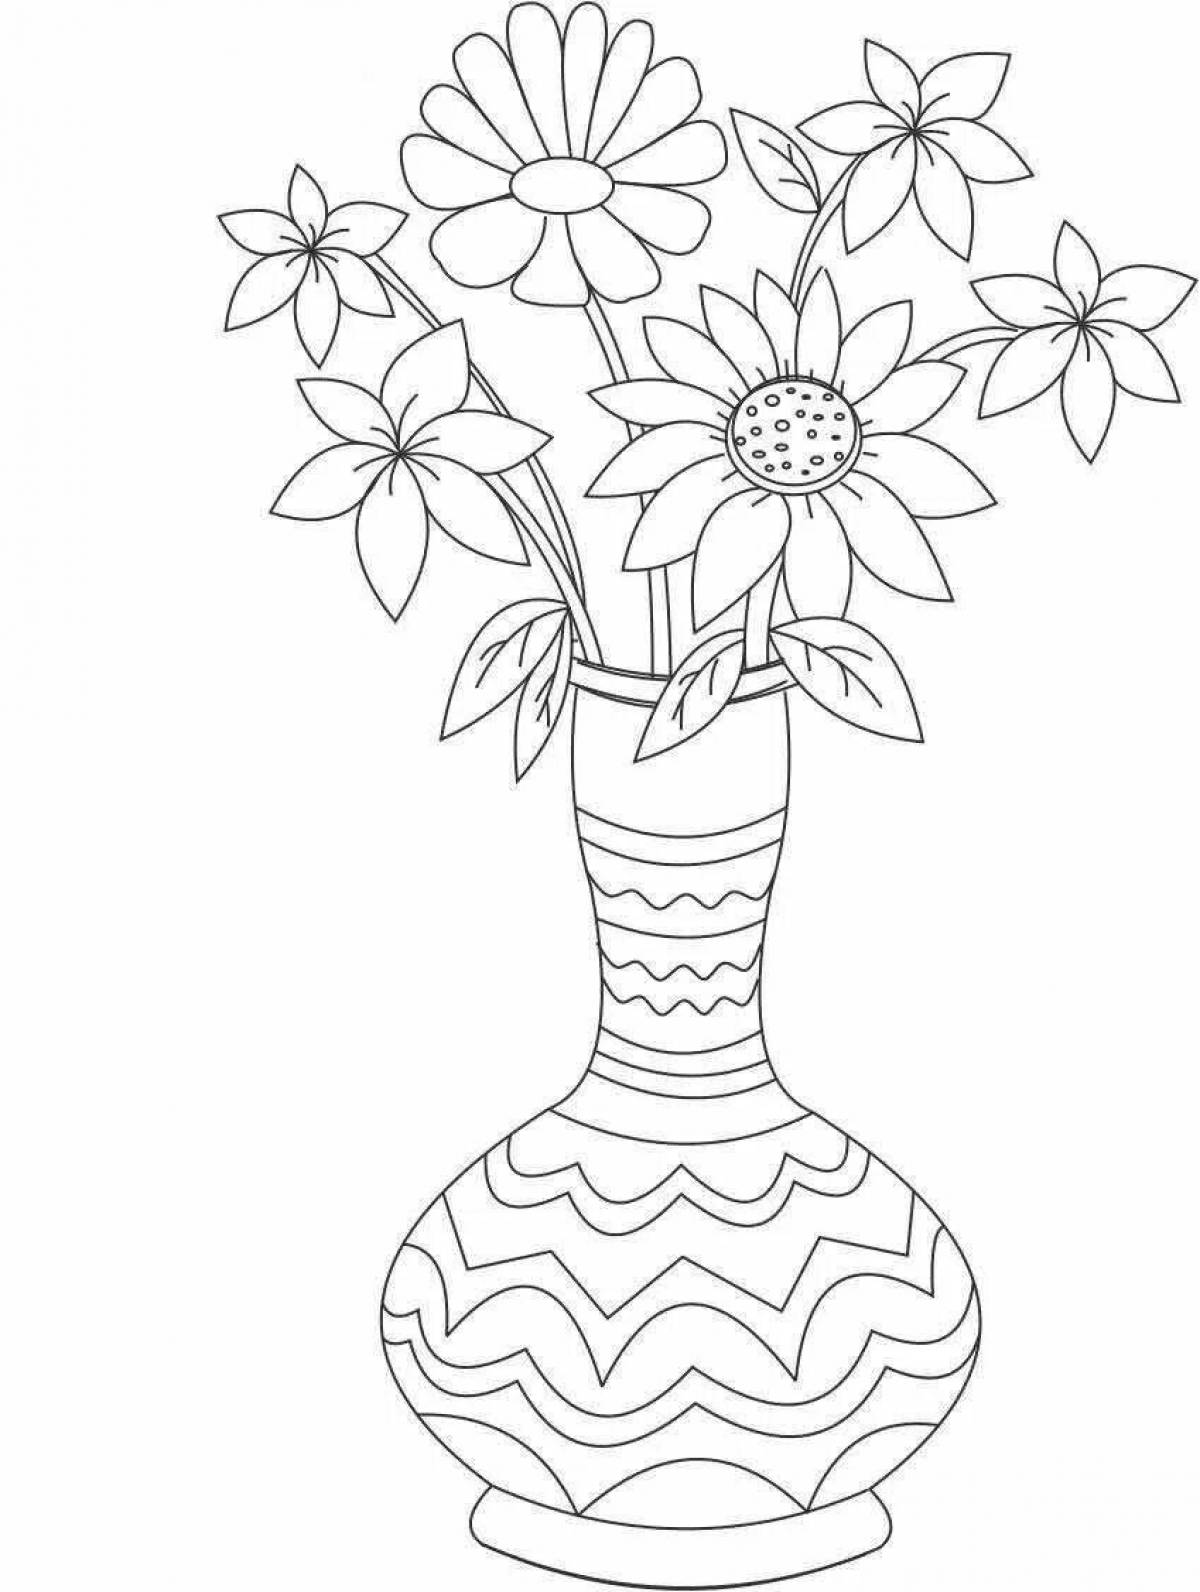 Attractive big flowers in a vase coloring book